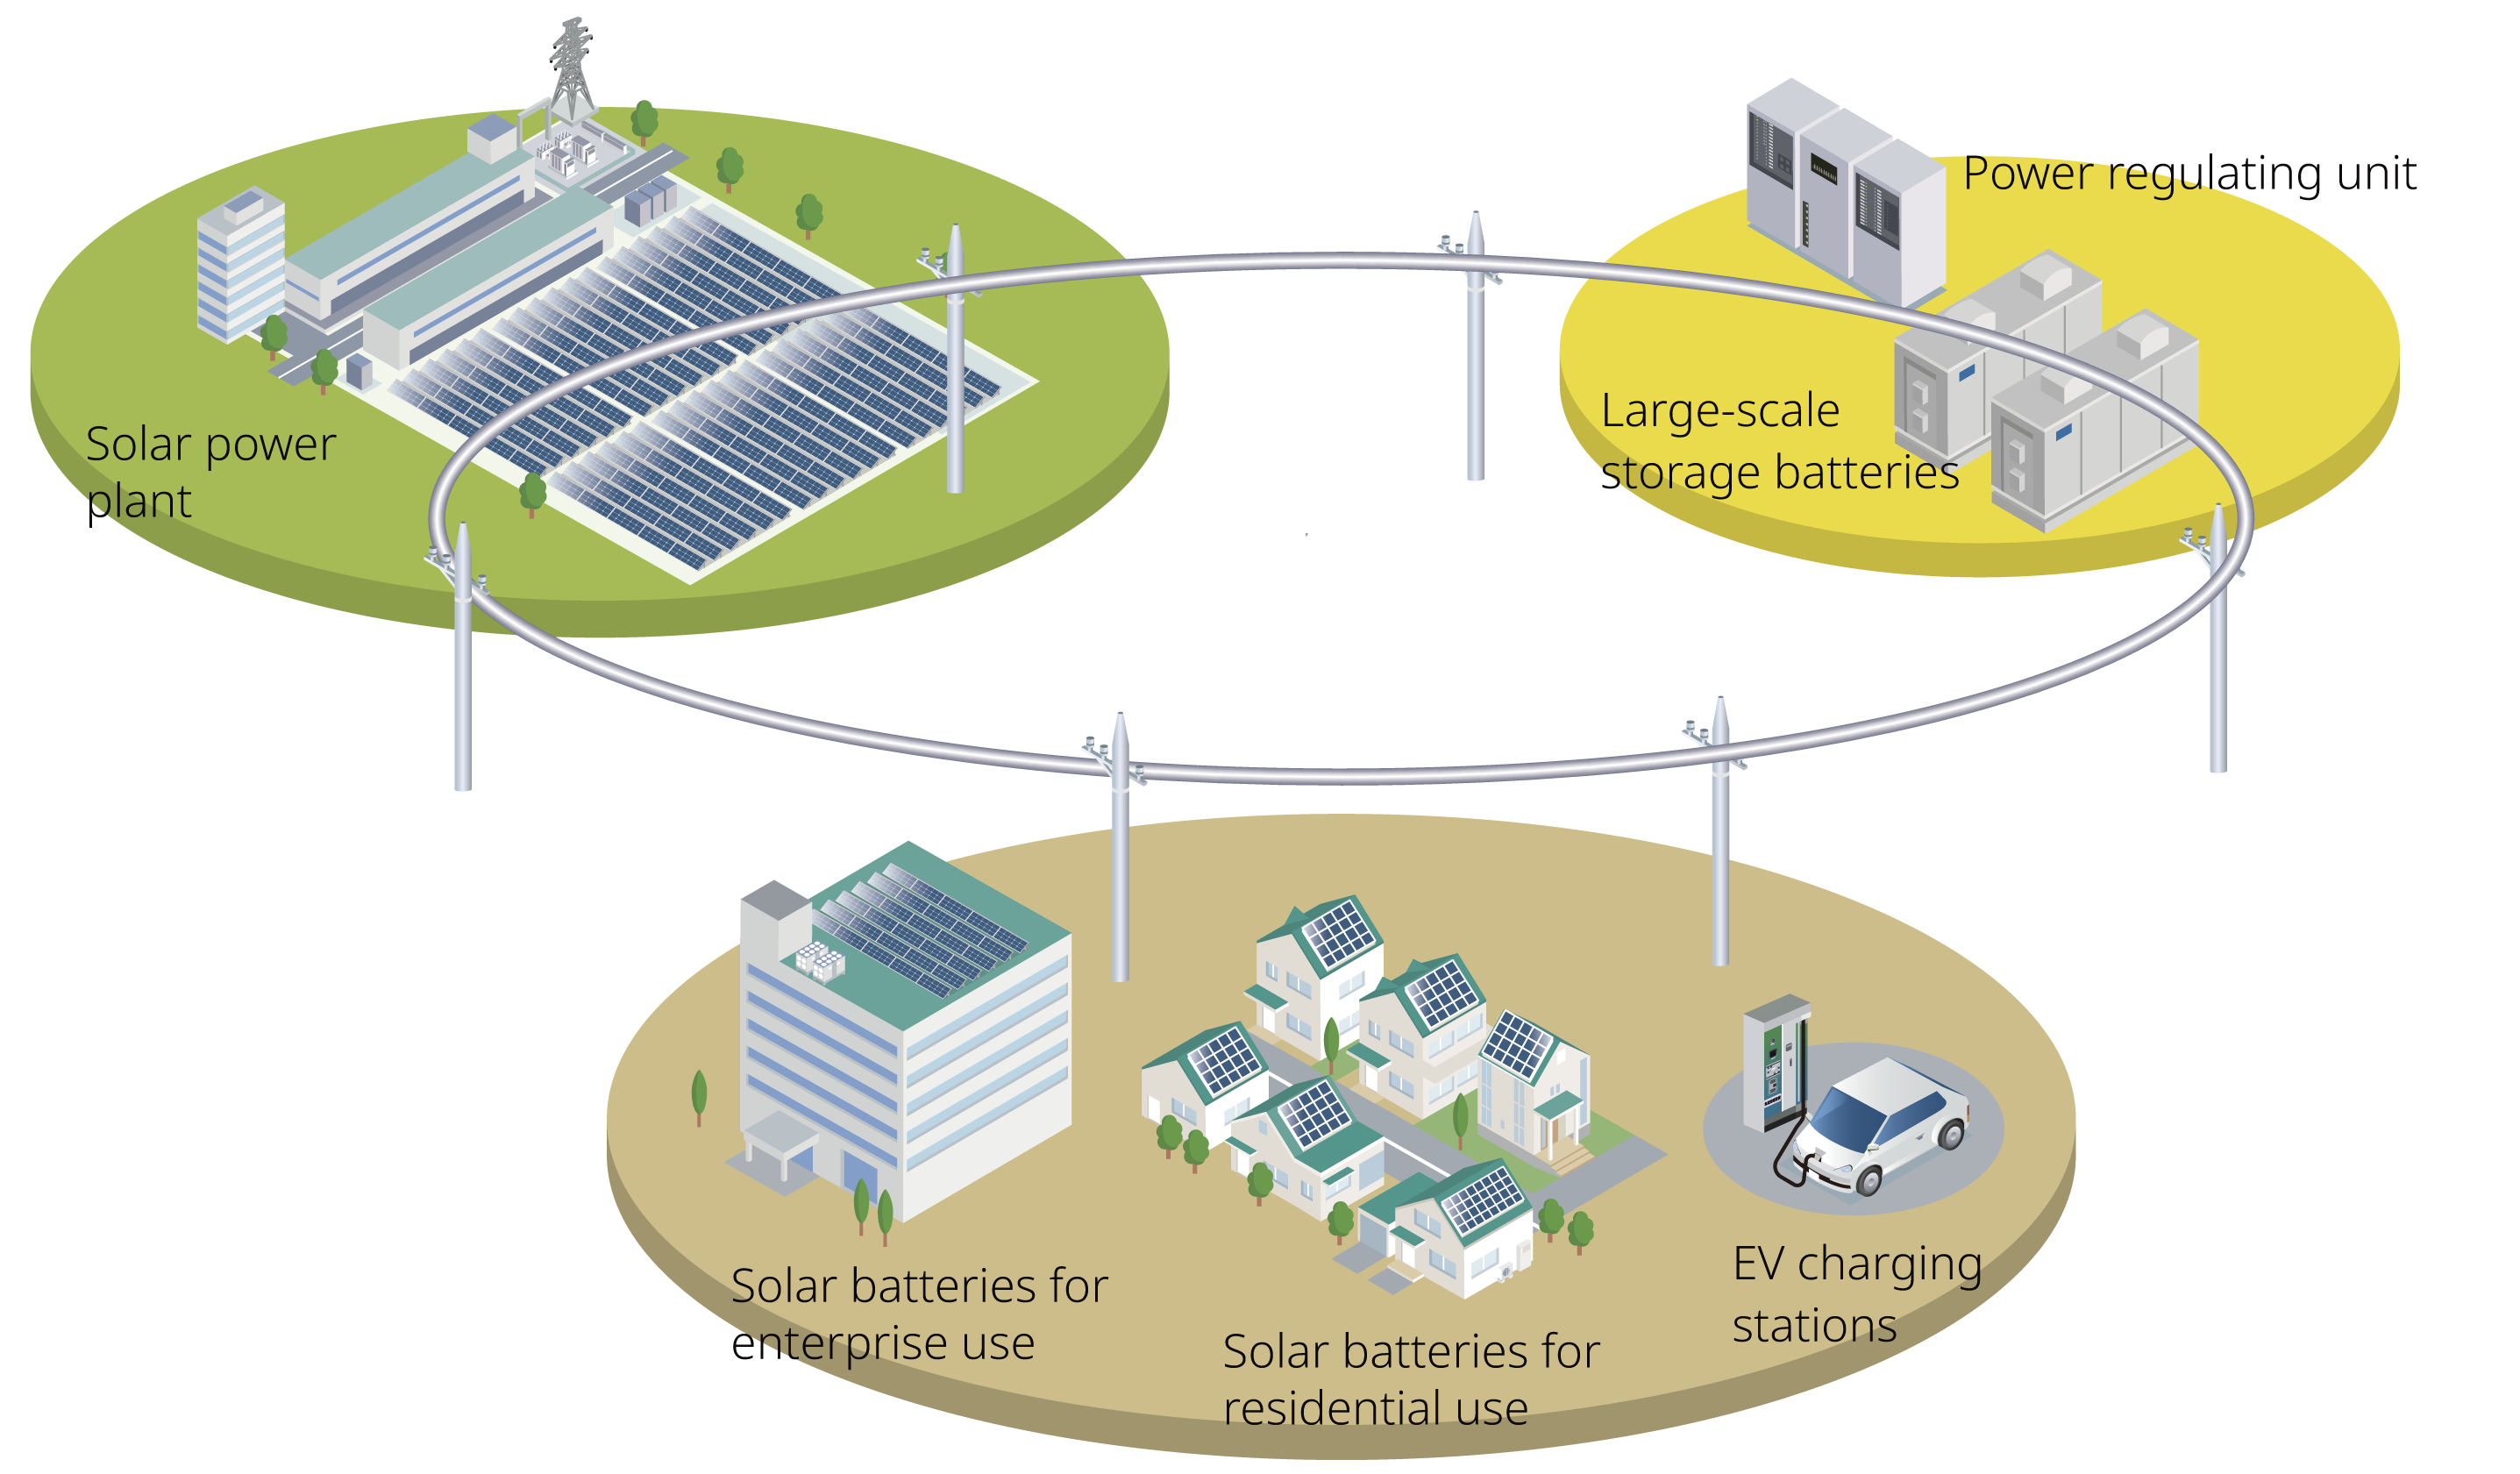 image: Expansion of the Regional Microgrid